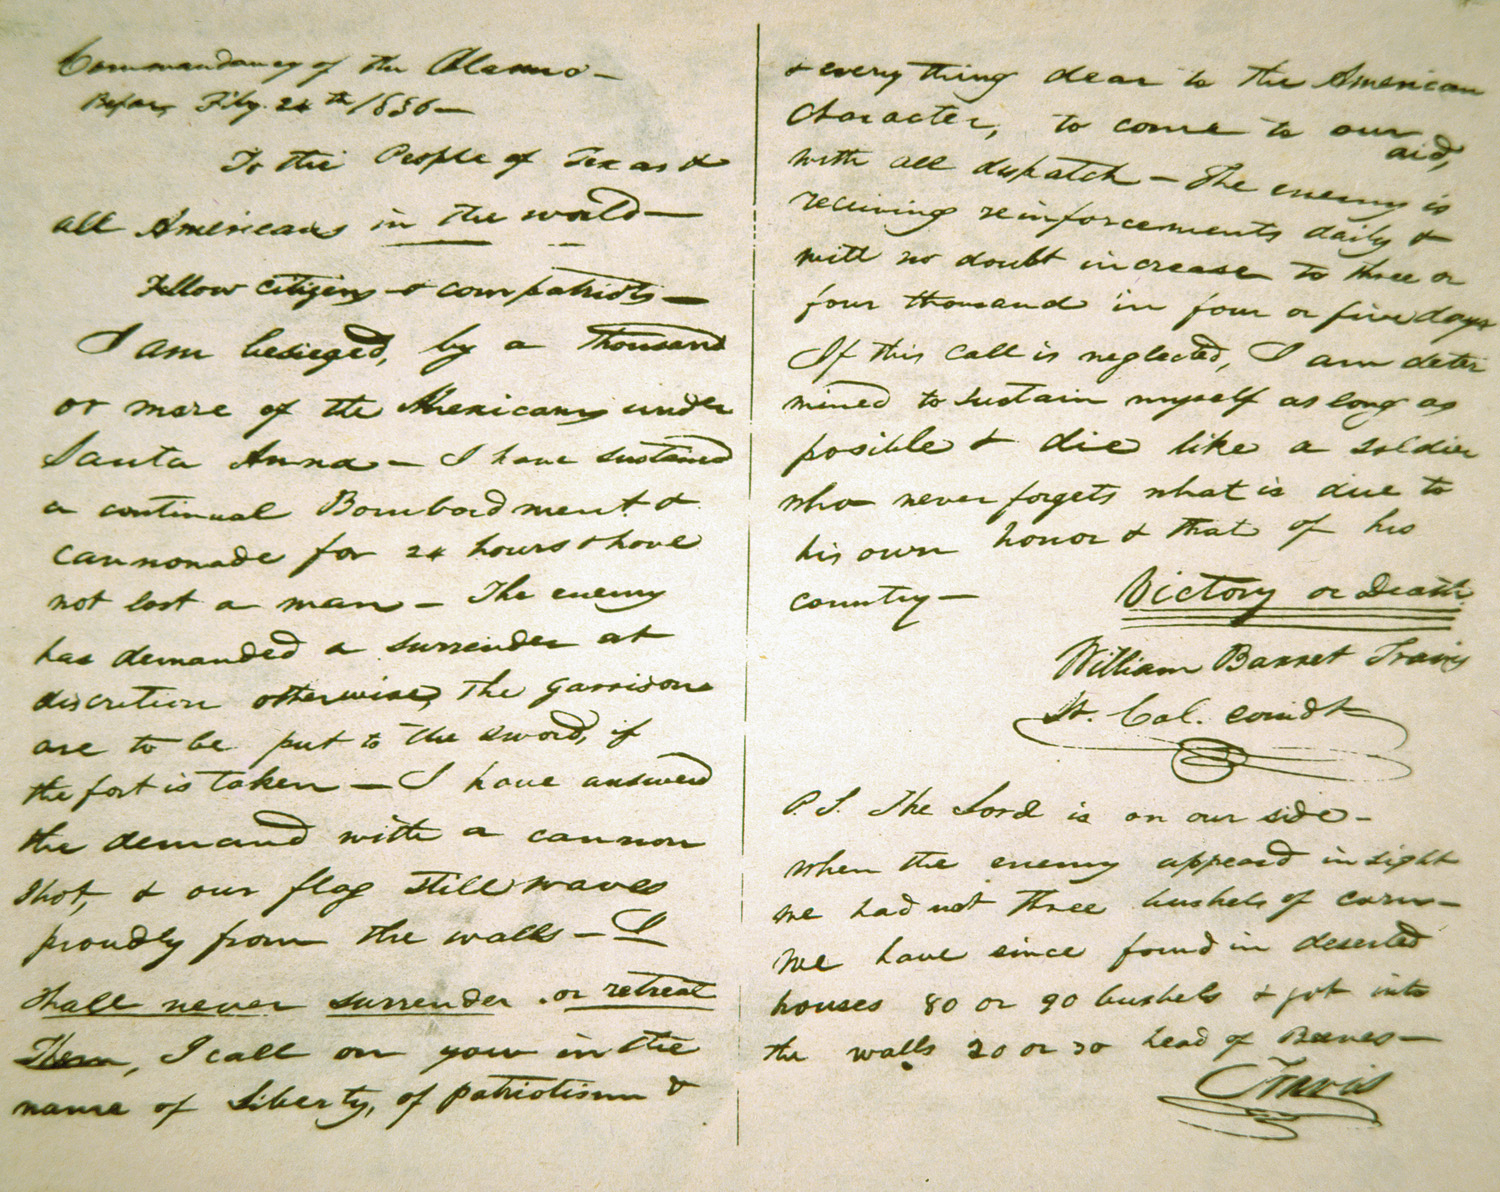 Ten days before the assault, William Travis wrote his letter “To the People of Texas and all Americans of the World,” finishing it—visible at middle right—with the words “Victory or Death.”